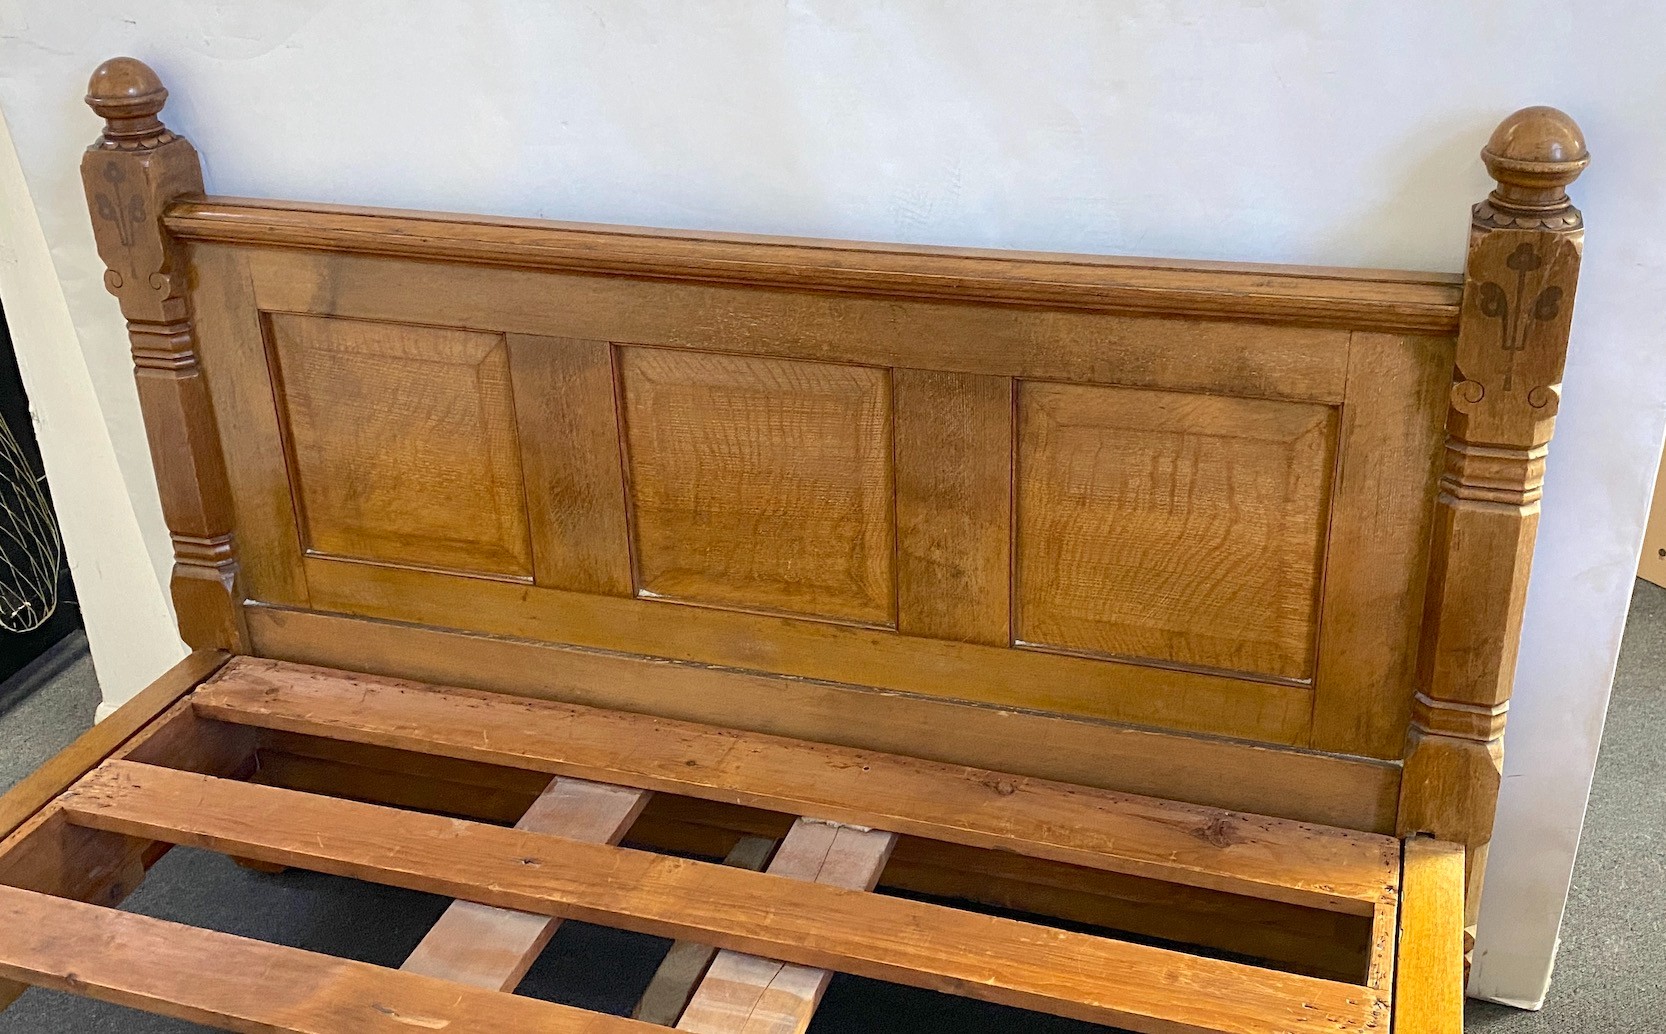 Charles Bevan probably for Marsh & Jones, Leeds. An Arts & Crafts pollard oak and marquetry half tester bed, width 156cm length 213cm height 226cm